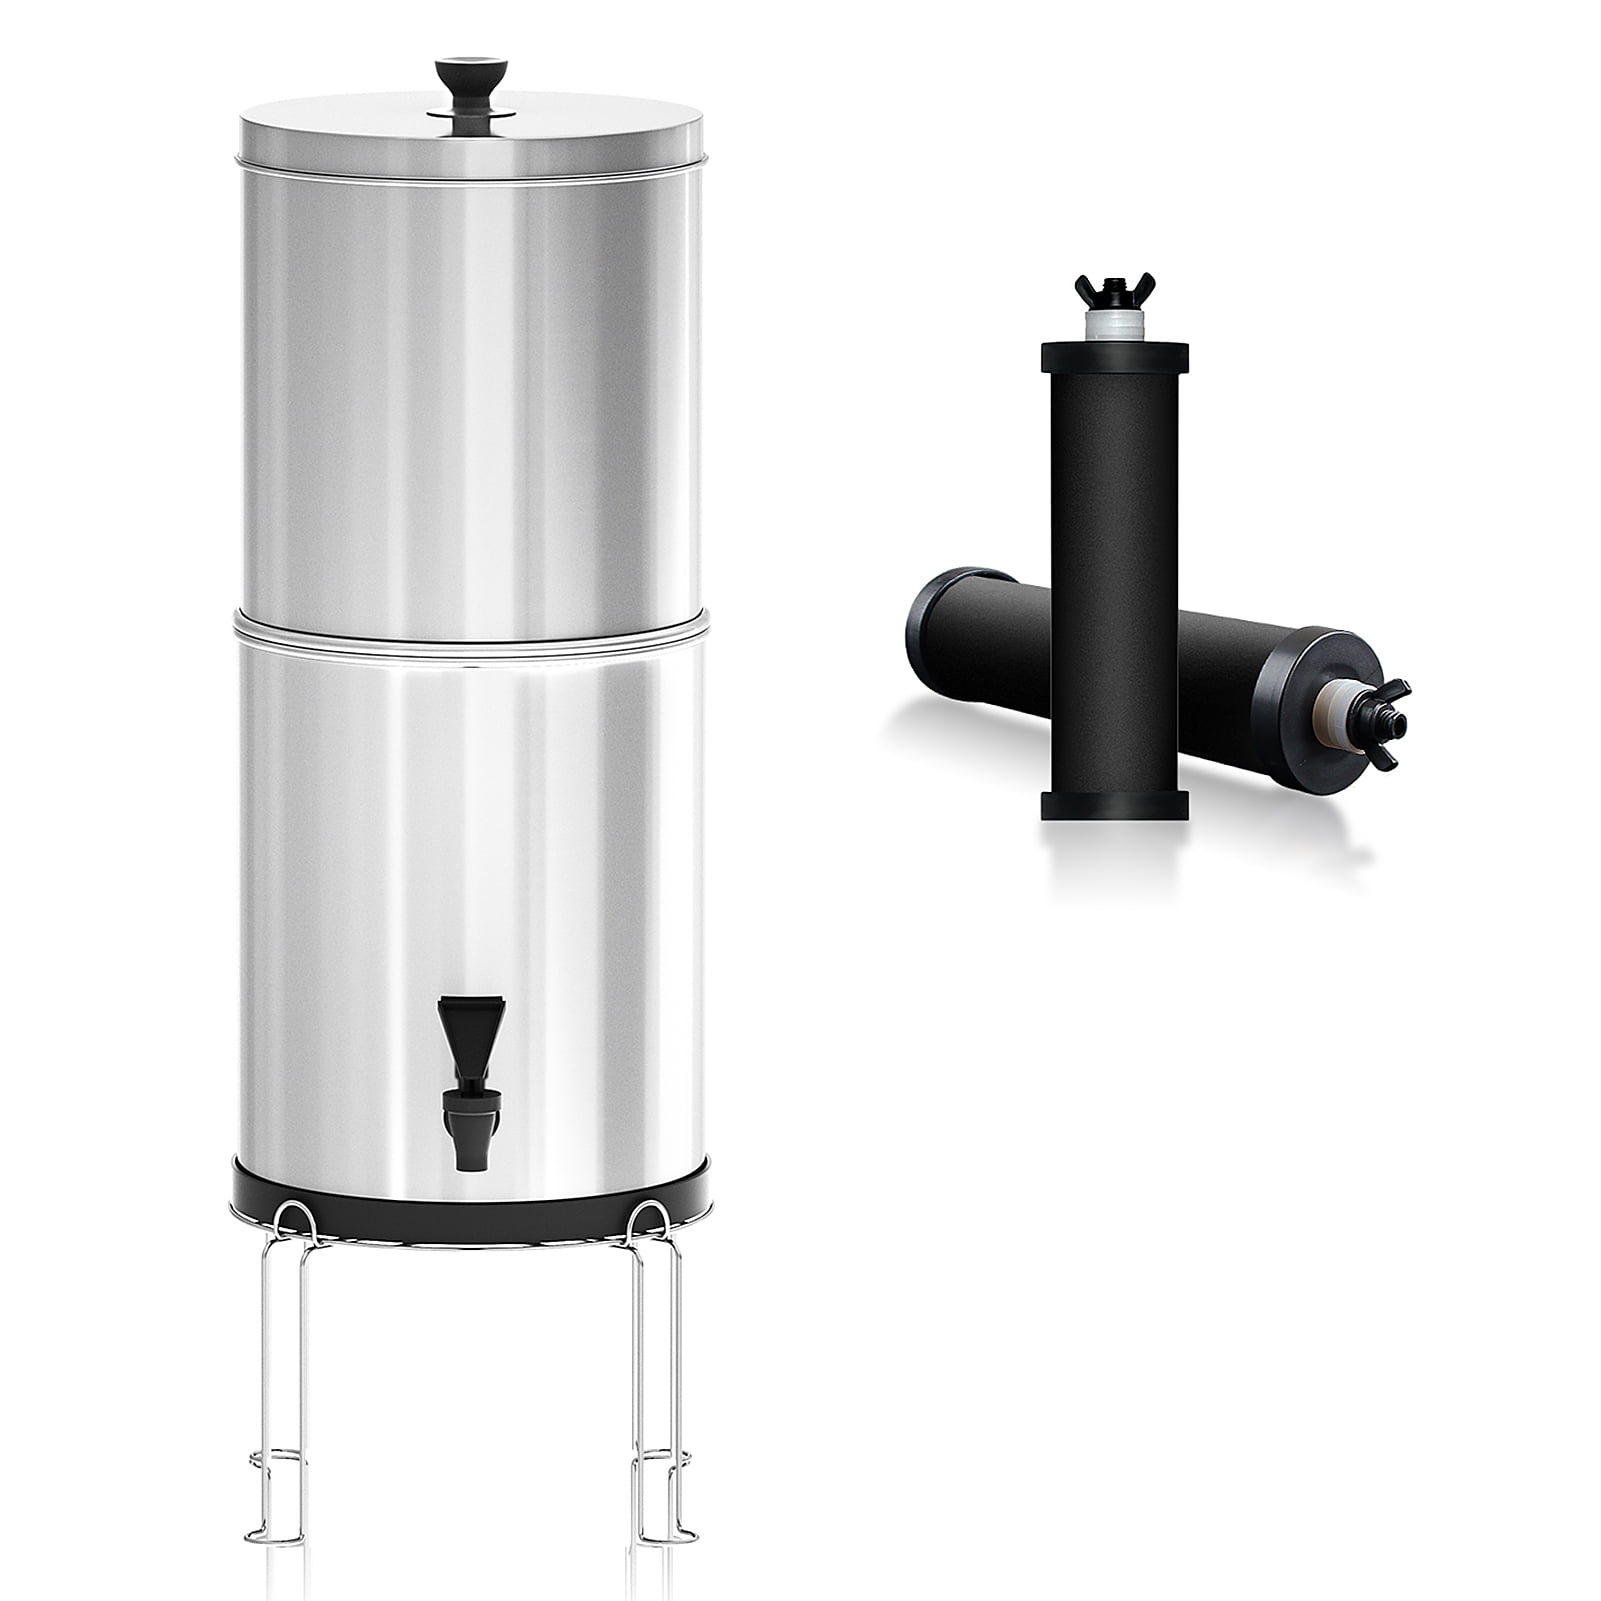 Vortopt Gravity Water Filter - Camping Water Filtration System - SGS